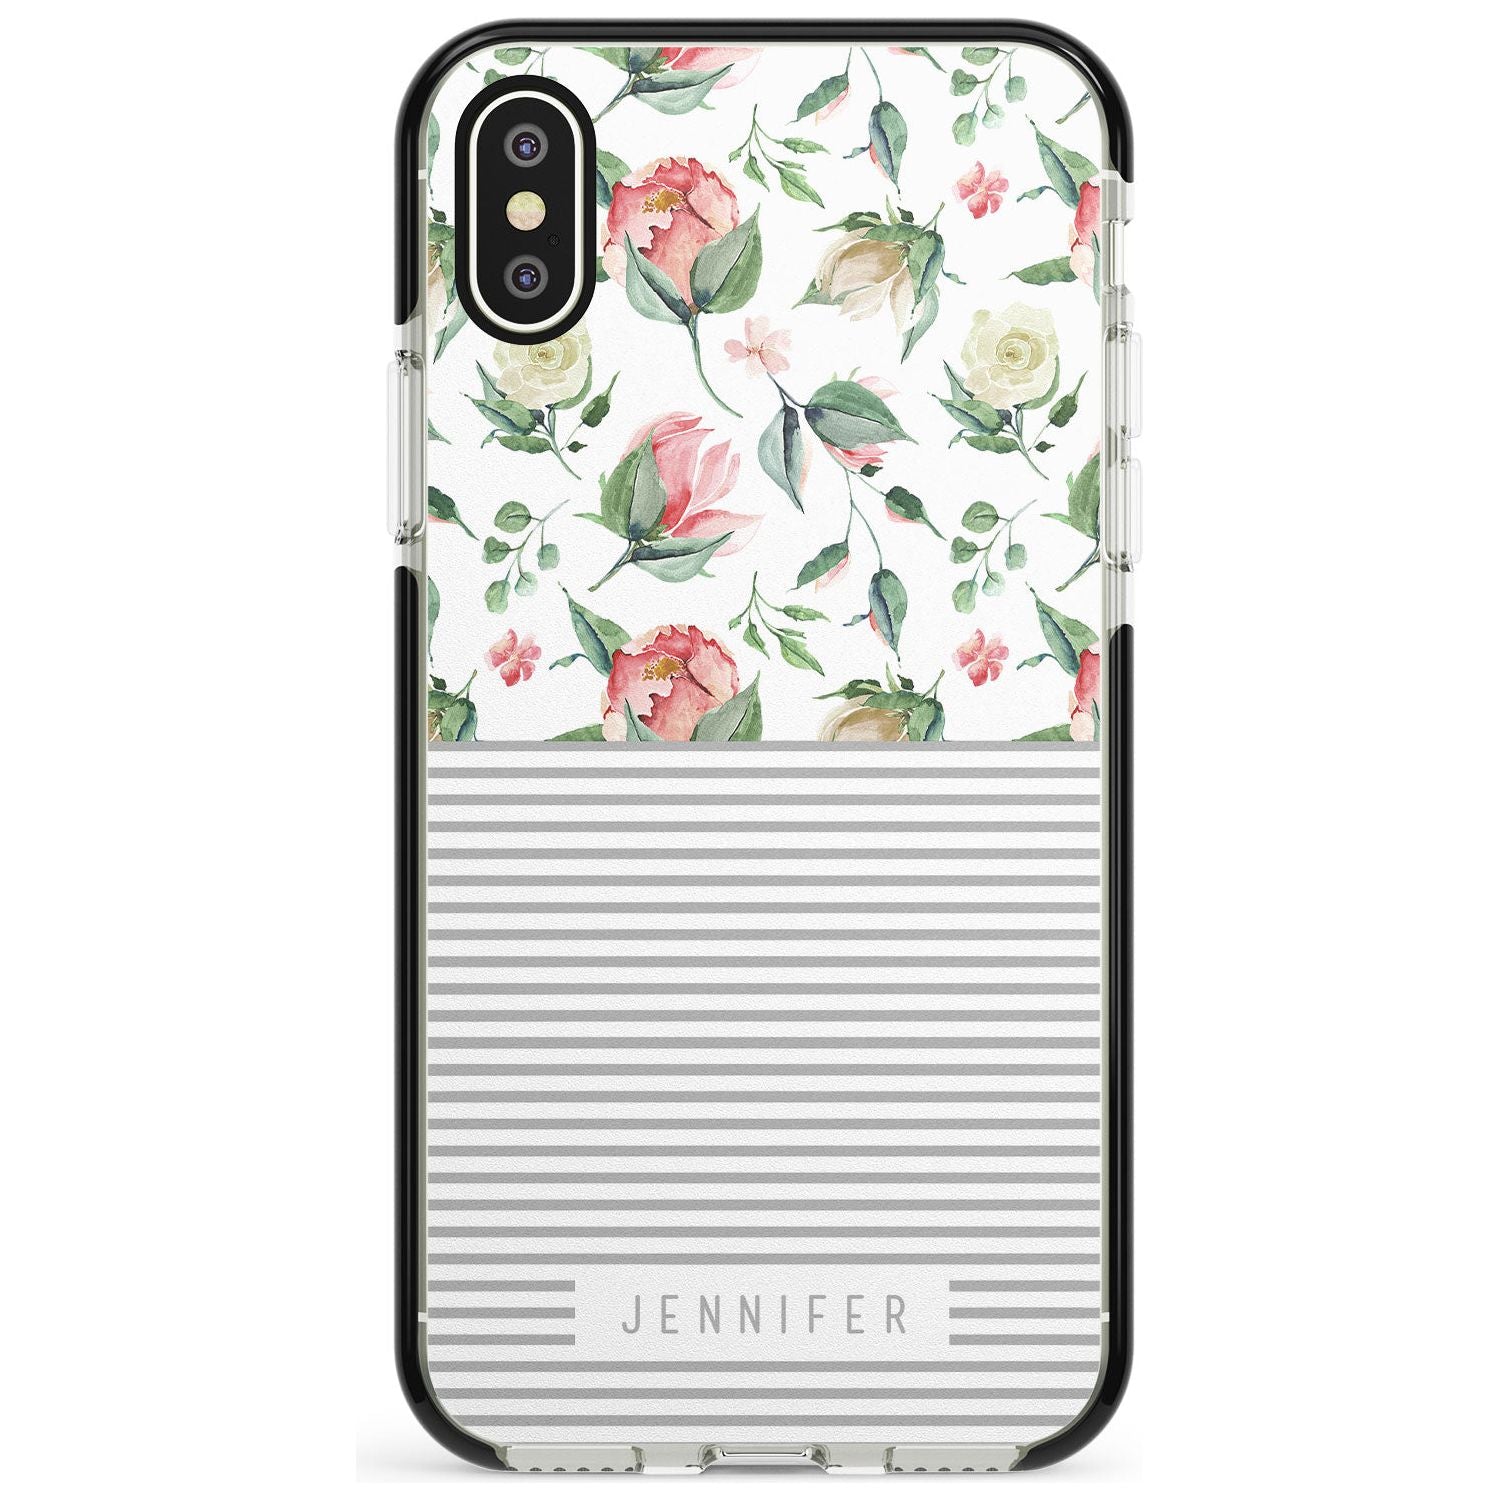 Light Floral Pattern & Stripes Pink Fade Impact Phone Case for iPhone X XS Max XR